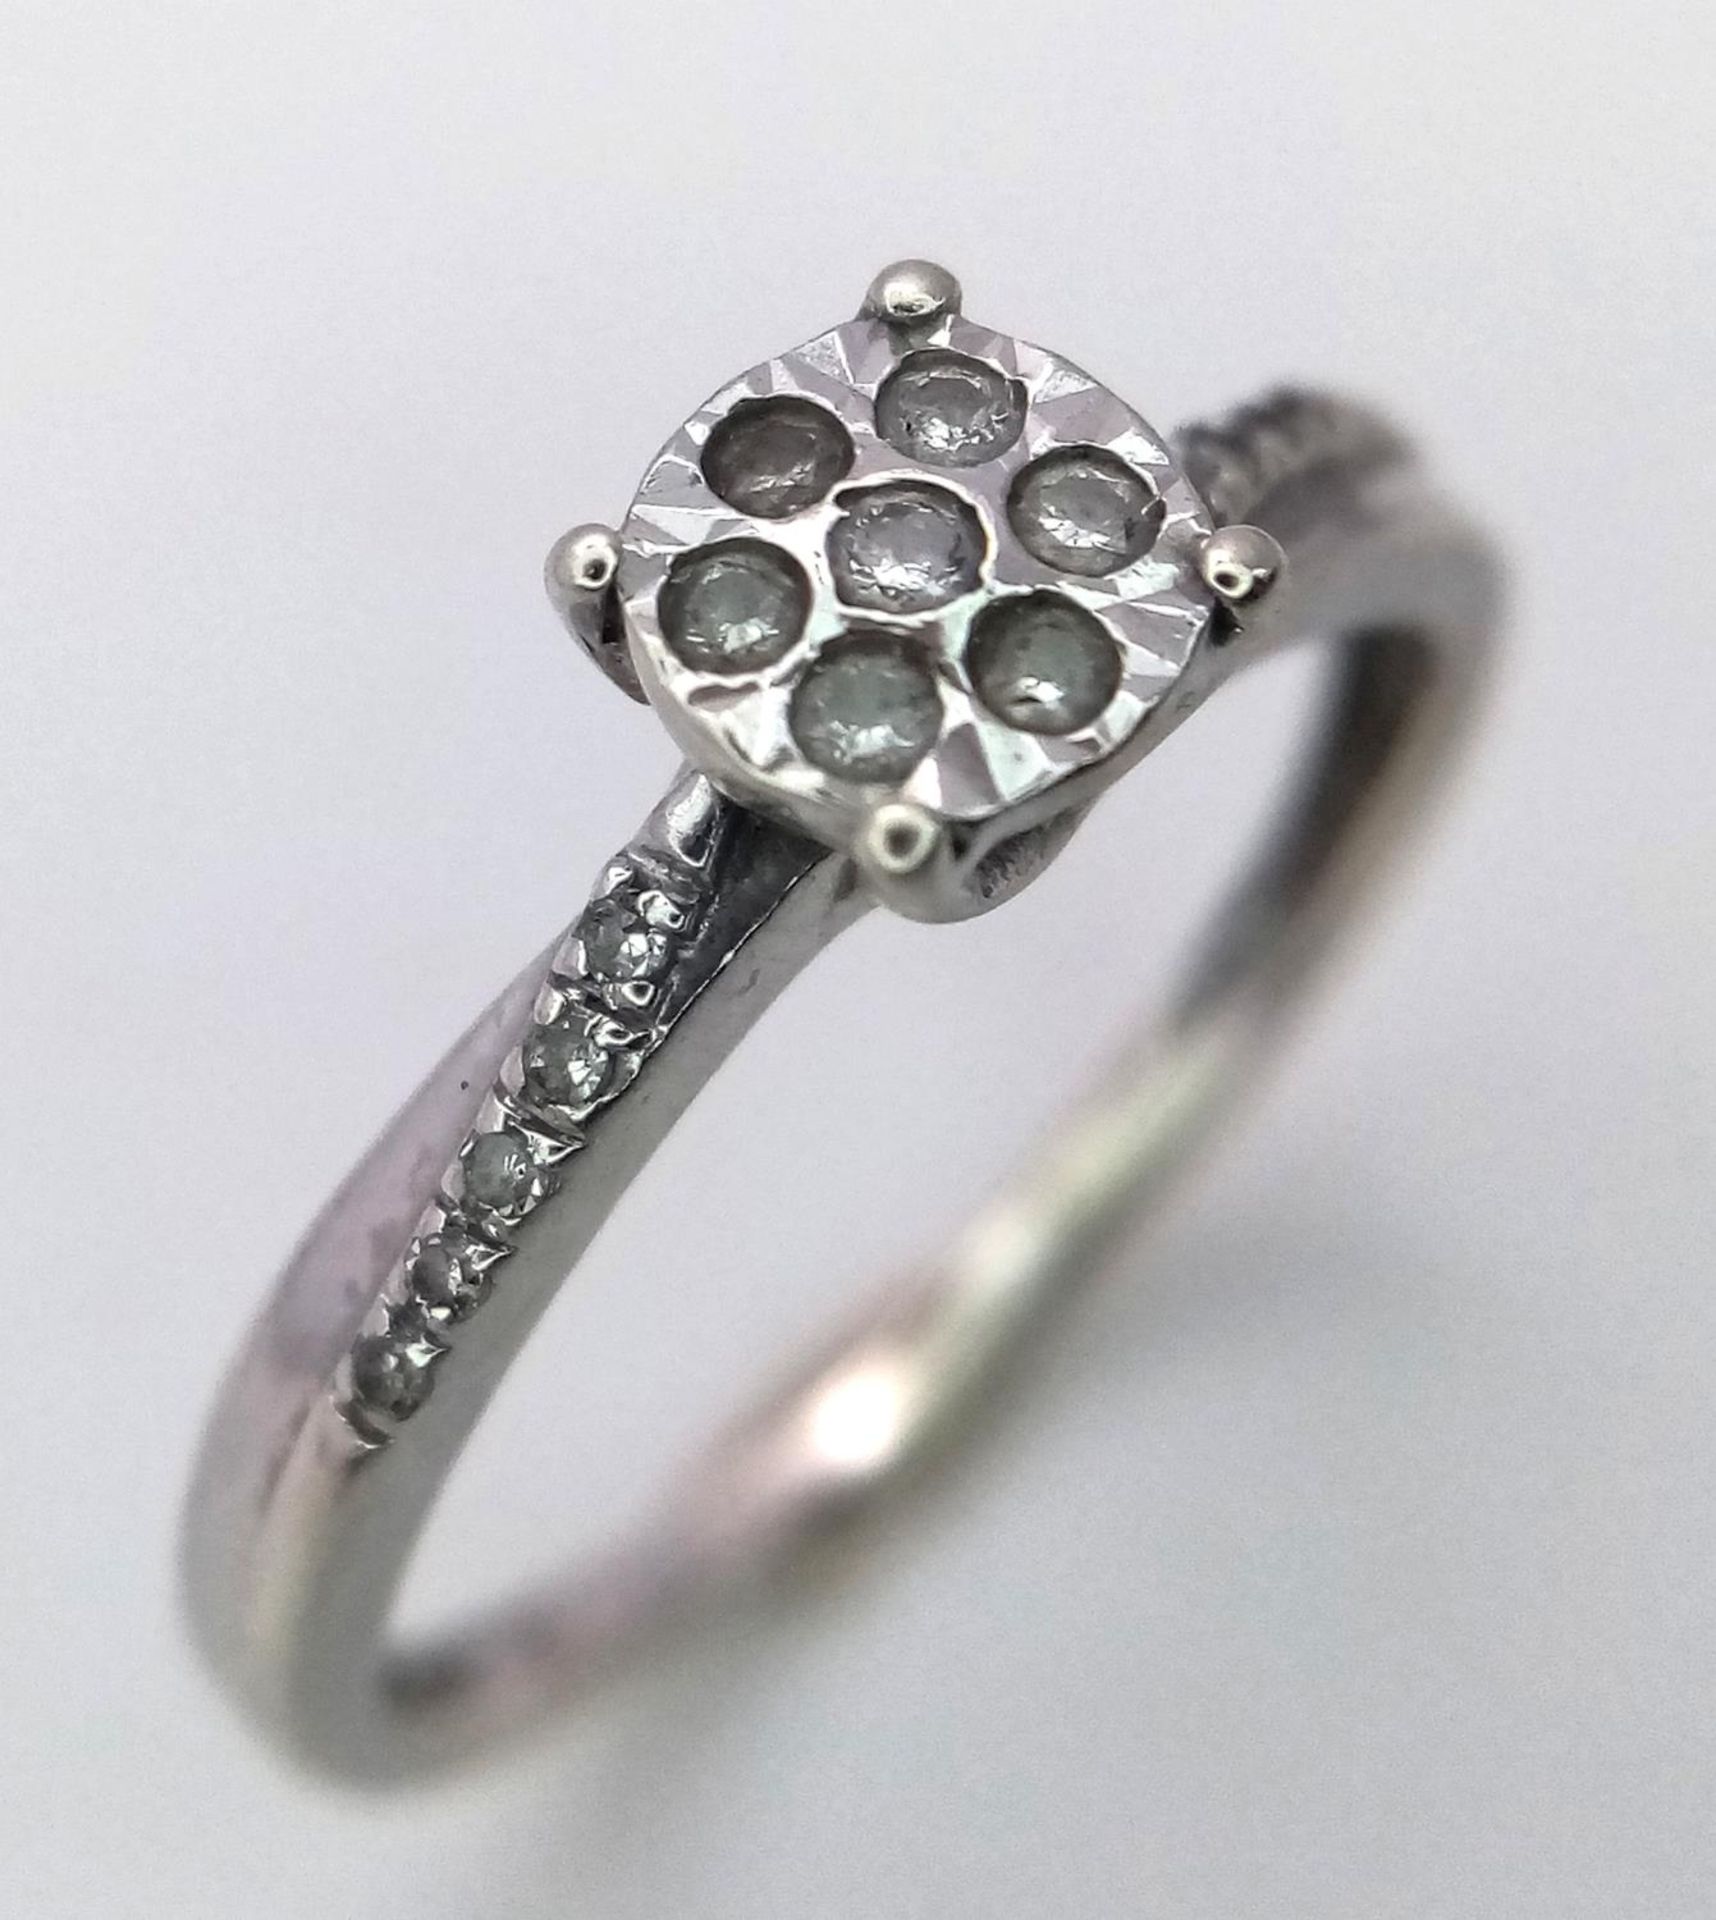 A 9K WHITE GOLD DIAMOND RING. Size K, 1.3g total weight. Ref: SC 9011